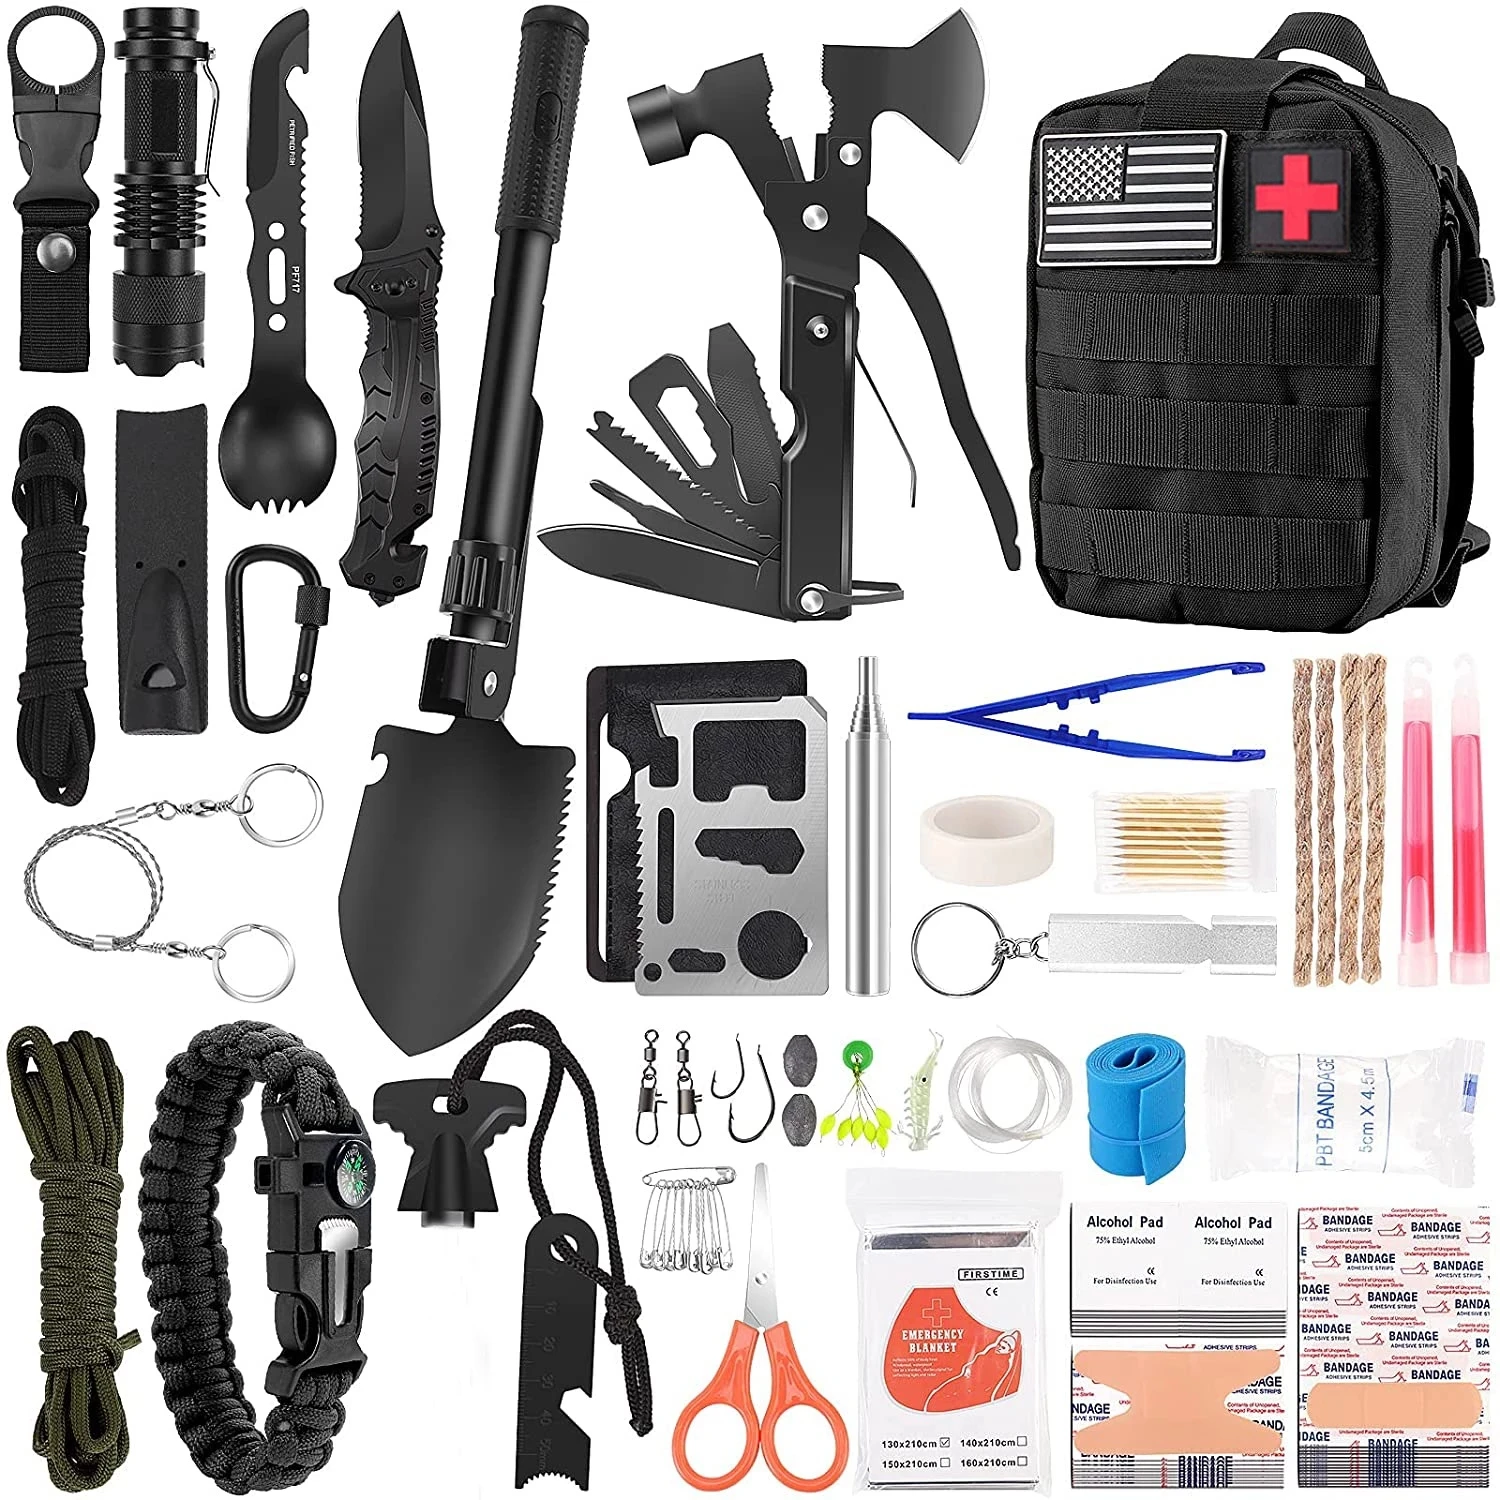 Survival Outdoor Gear Emergency Kits Trauma Bag for Camping Hunting ...